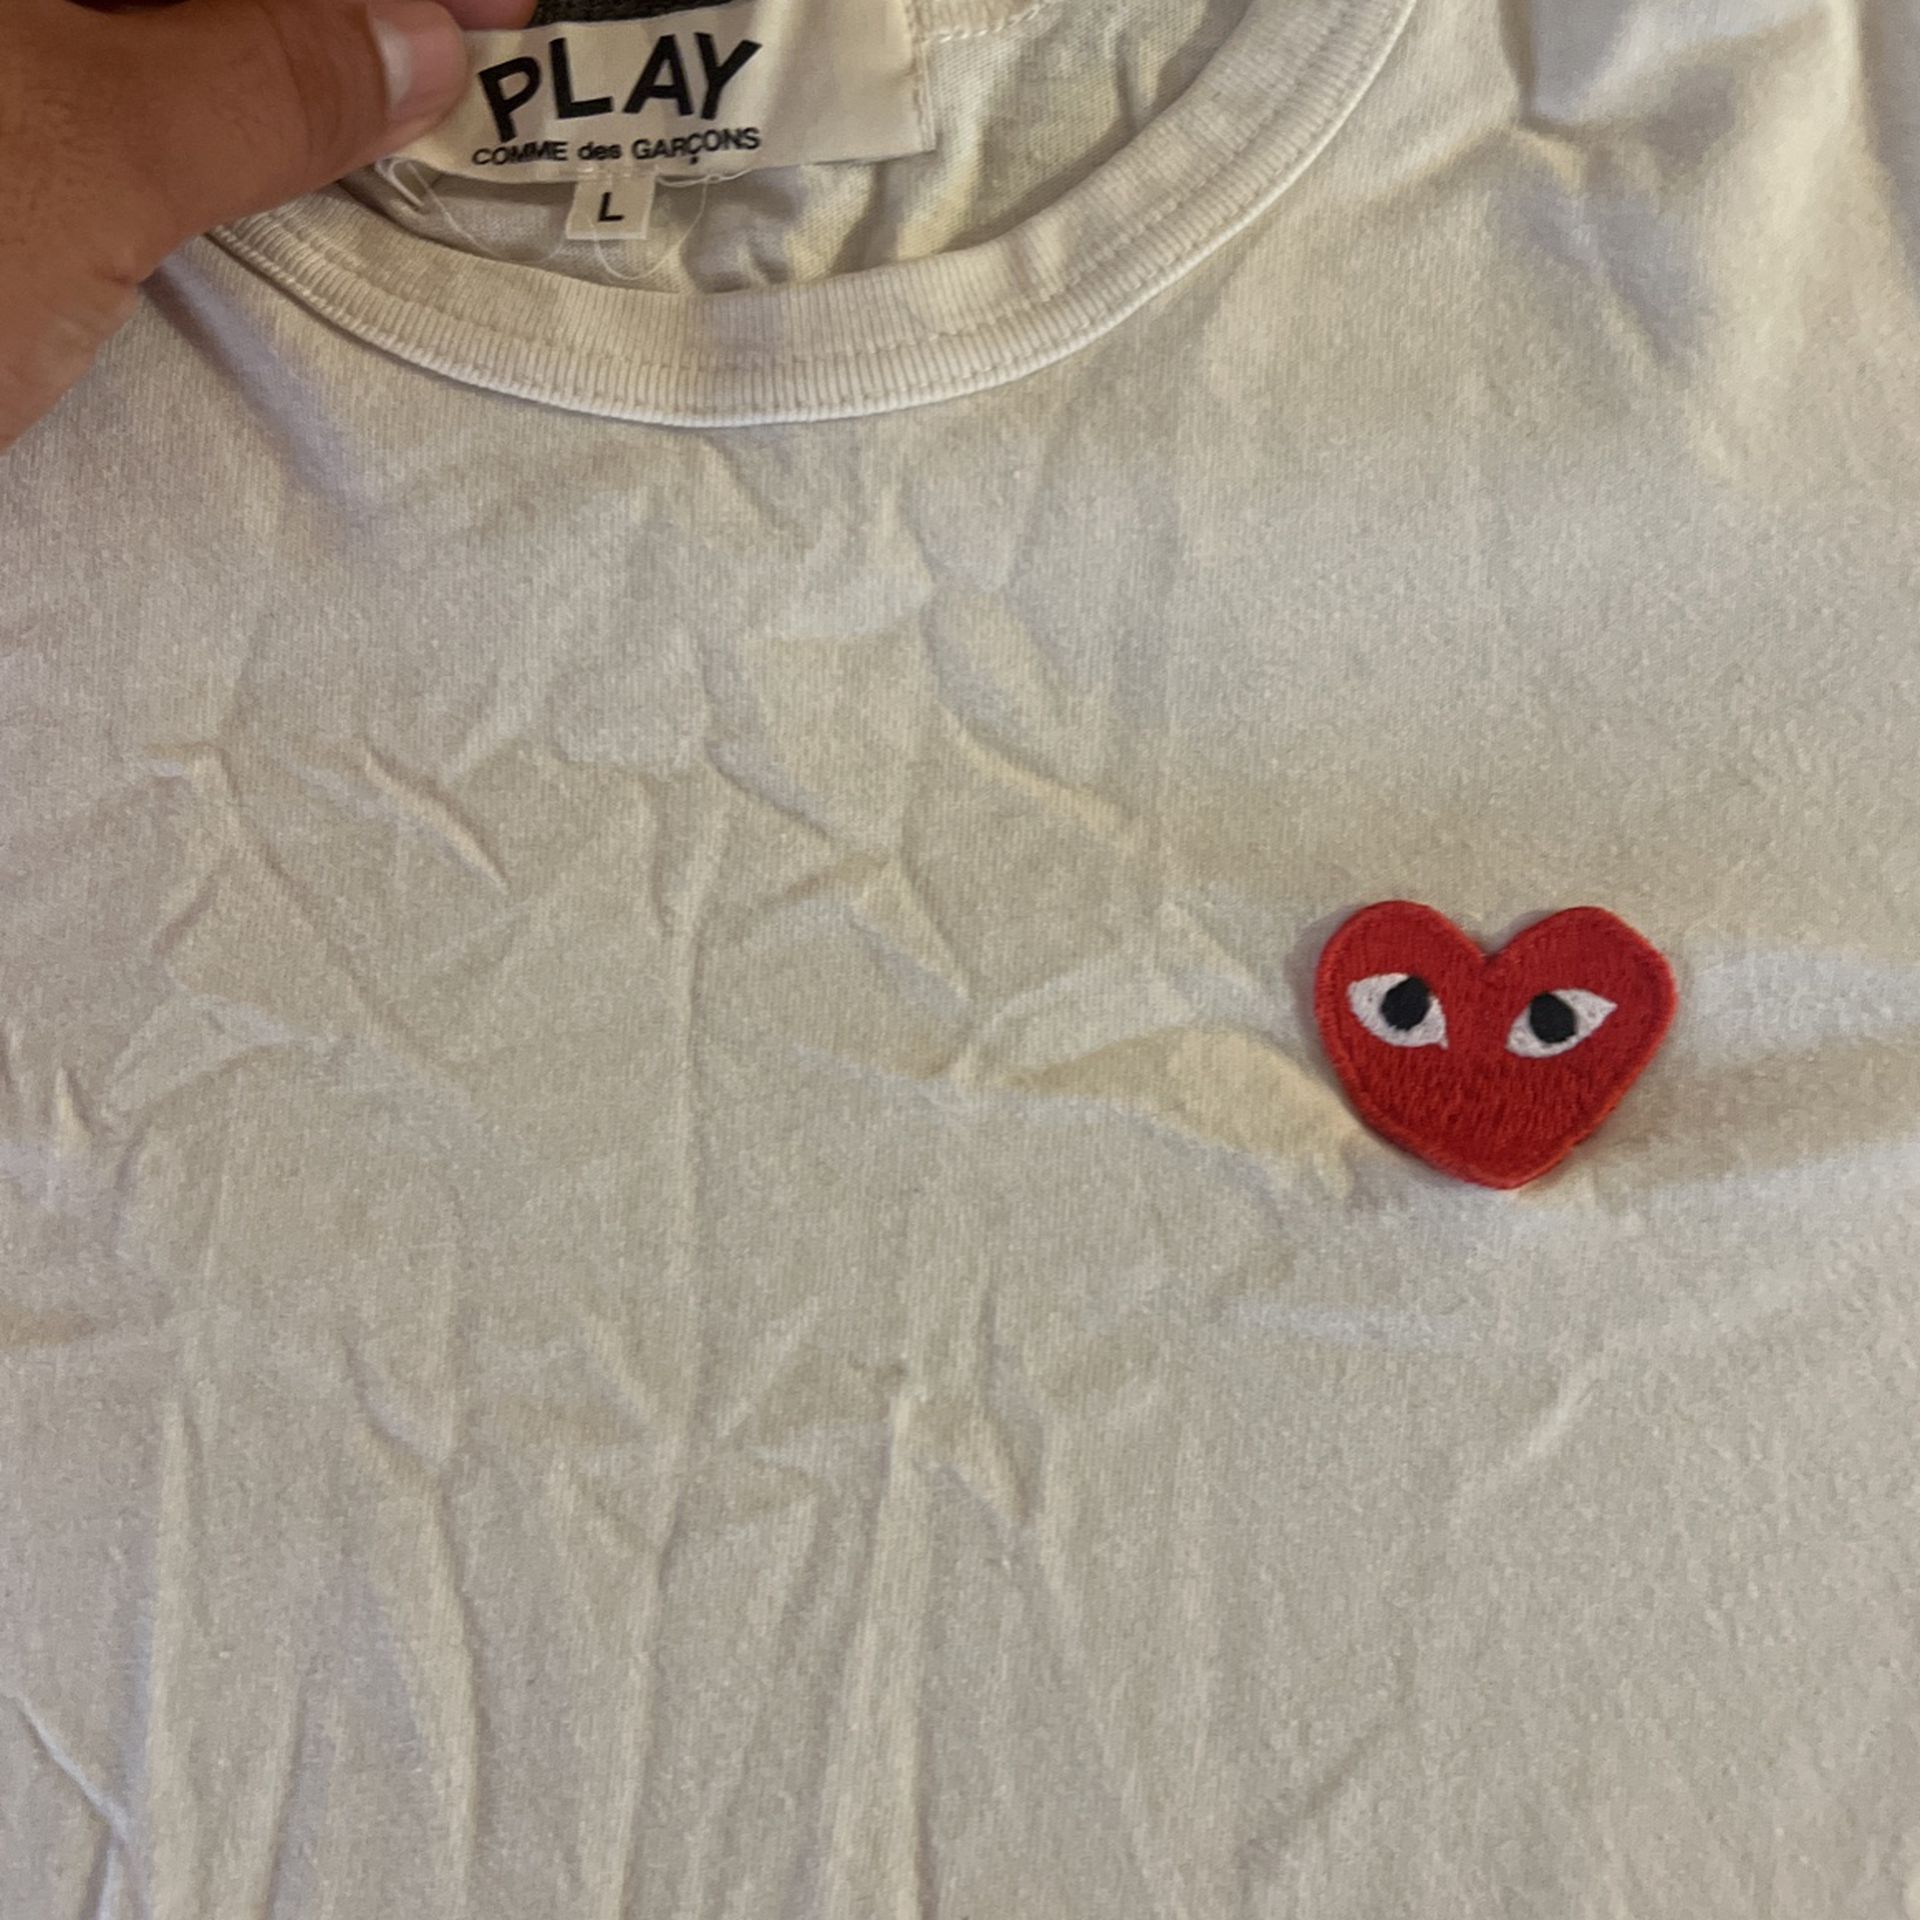 CDG Shirt for Sale in Los Angeles, CA - OfferUp